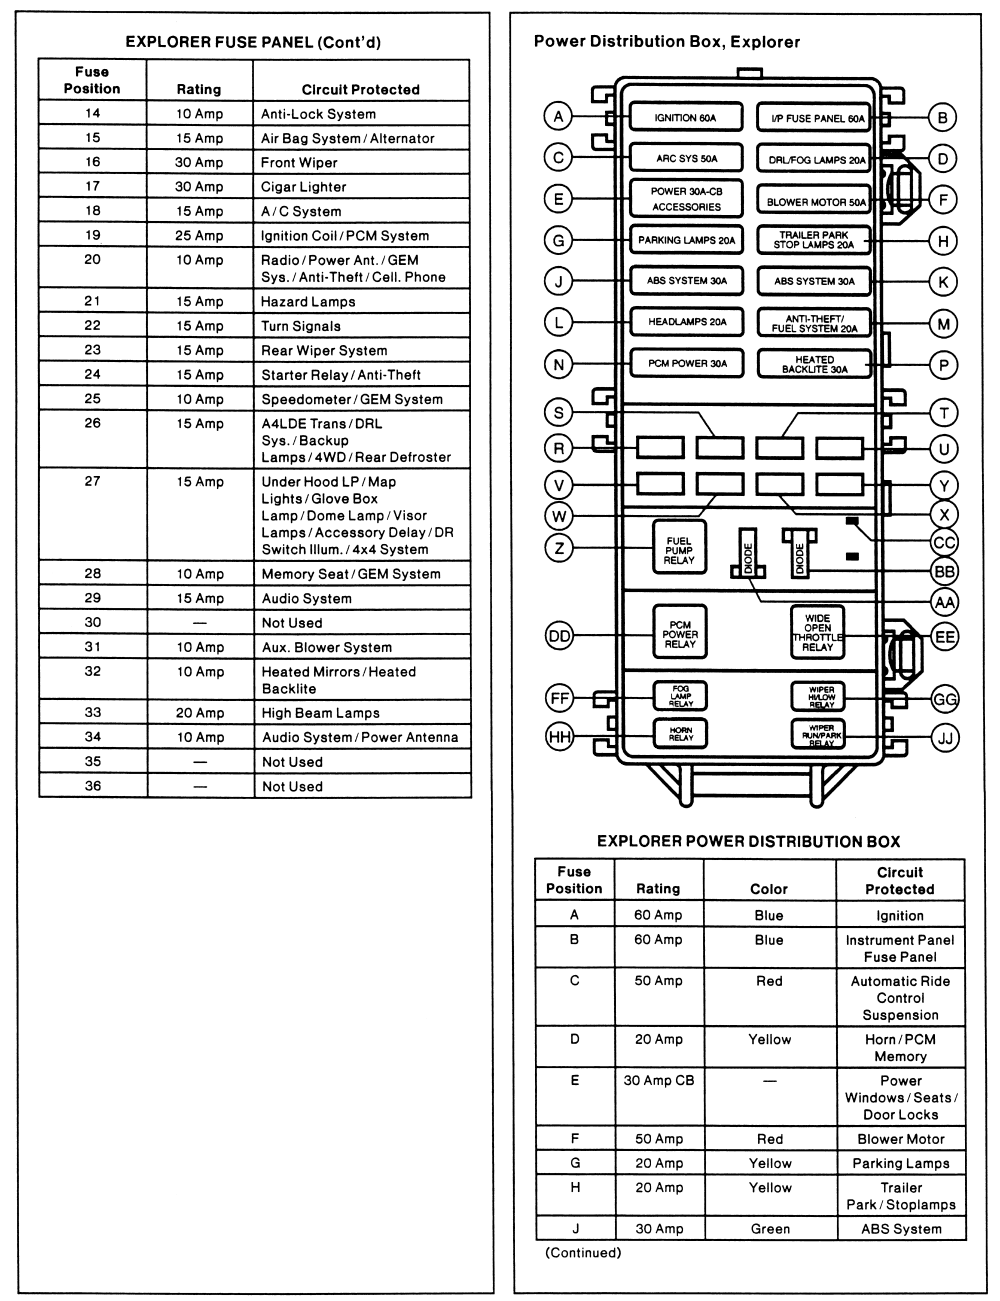 Ford Fuse Box Layout | Wiring Diagrams